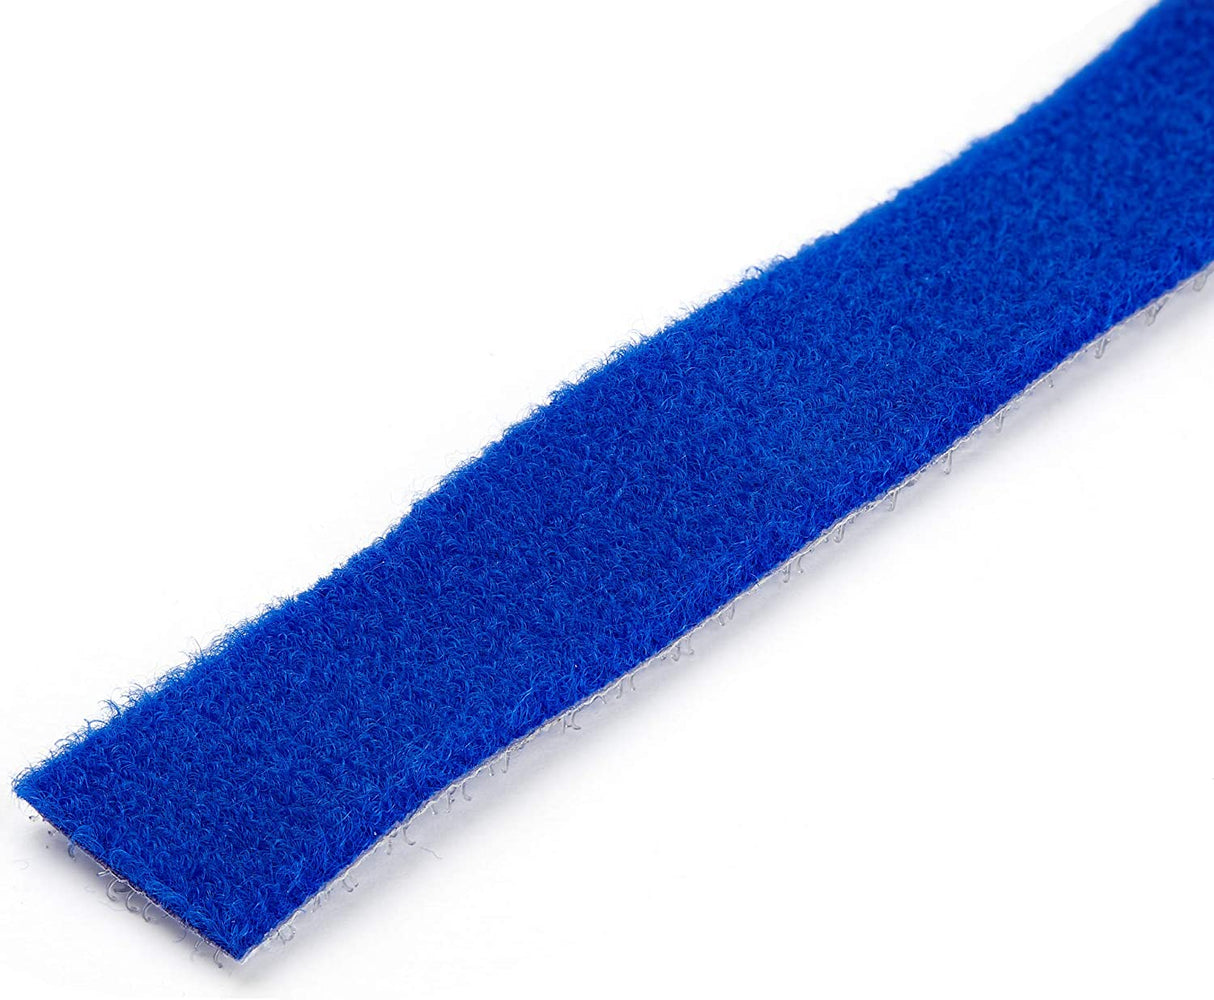 StarTech.com 50ft Hook and Loop Roll - Cut-to-Size Reusable Cable Ties - Bulk Industrial Wire Fastener Tape/Adjustable Fabric Wraps Blue/Resuable Self Gripping Cable Management Straps (HKLP50BL) 50 ft Blue